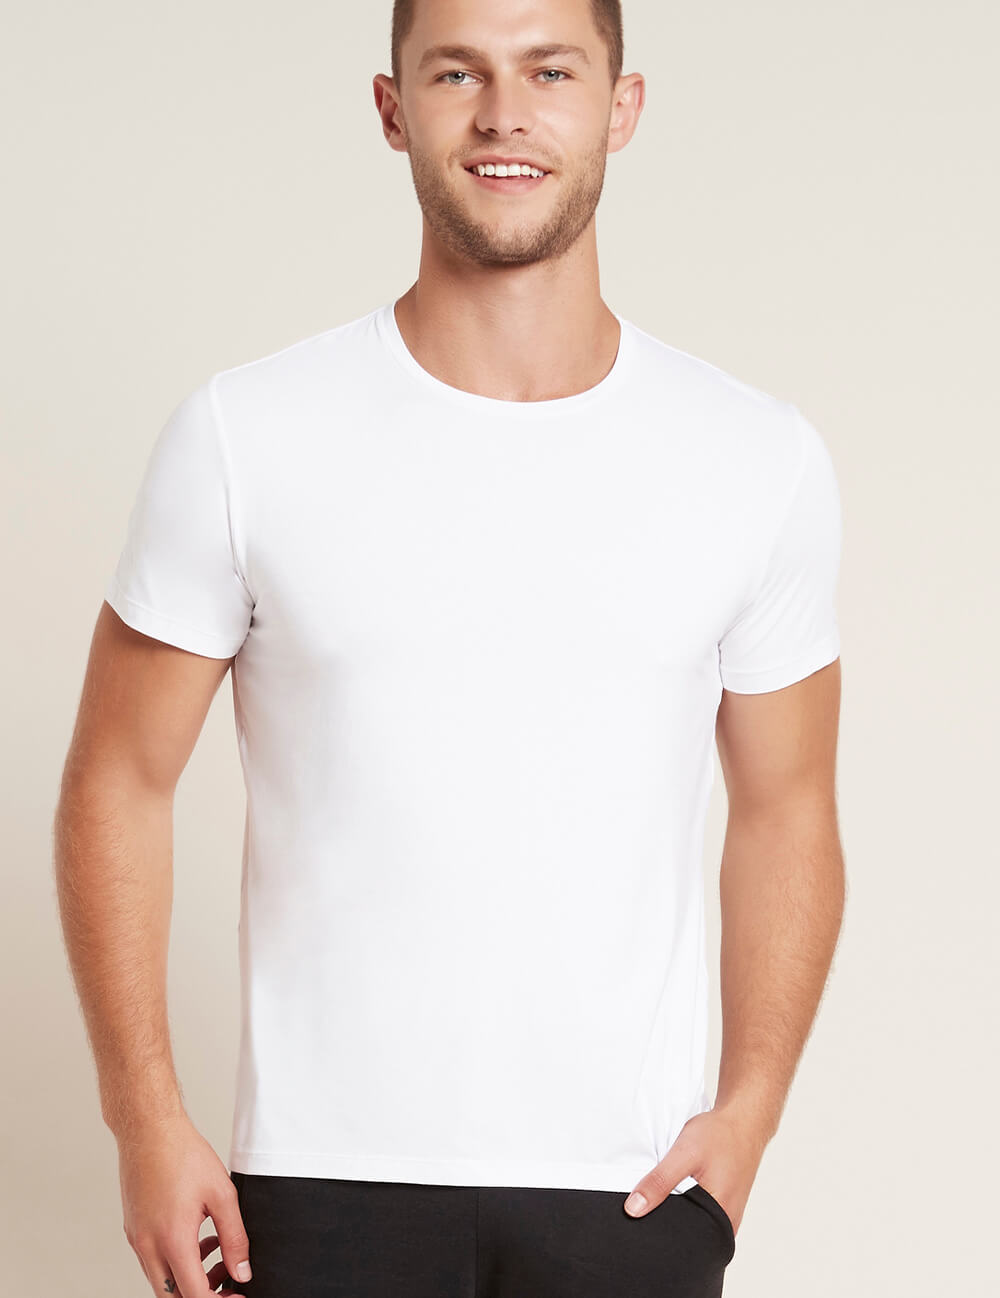 Boody Bamboo Men's Crew Neck T-Shirt in White Front View 4